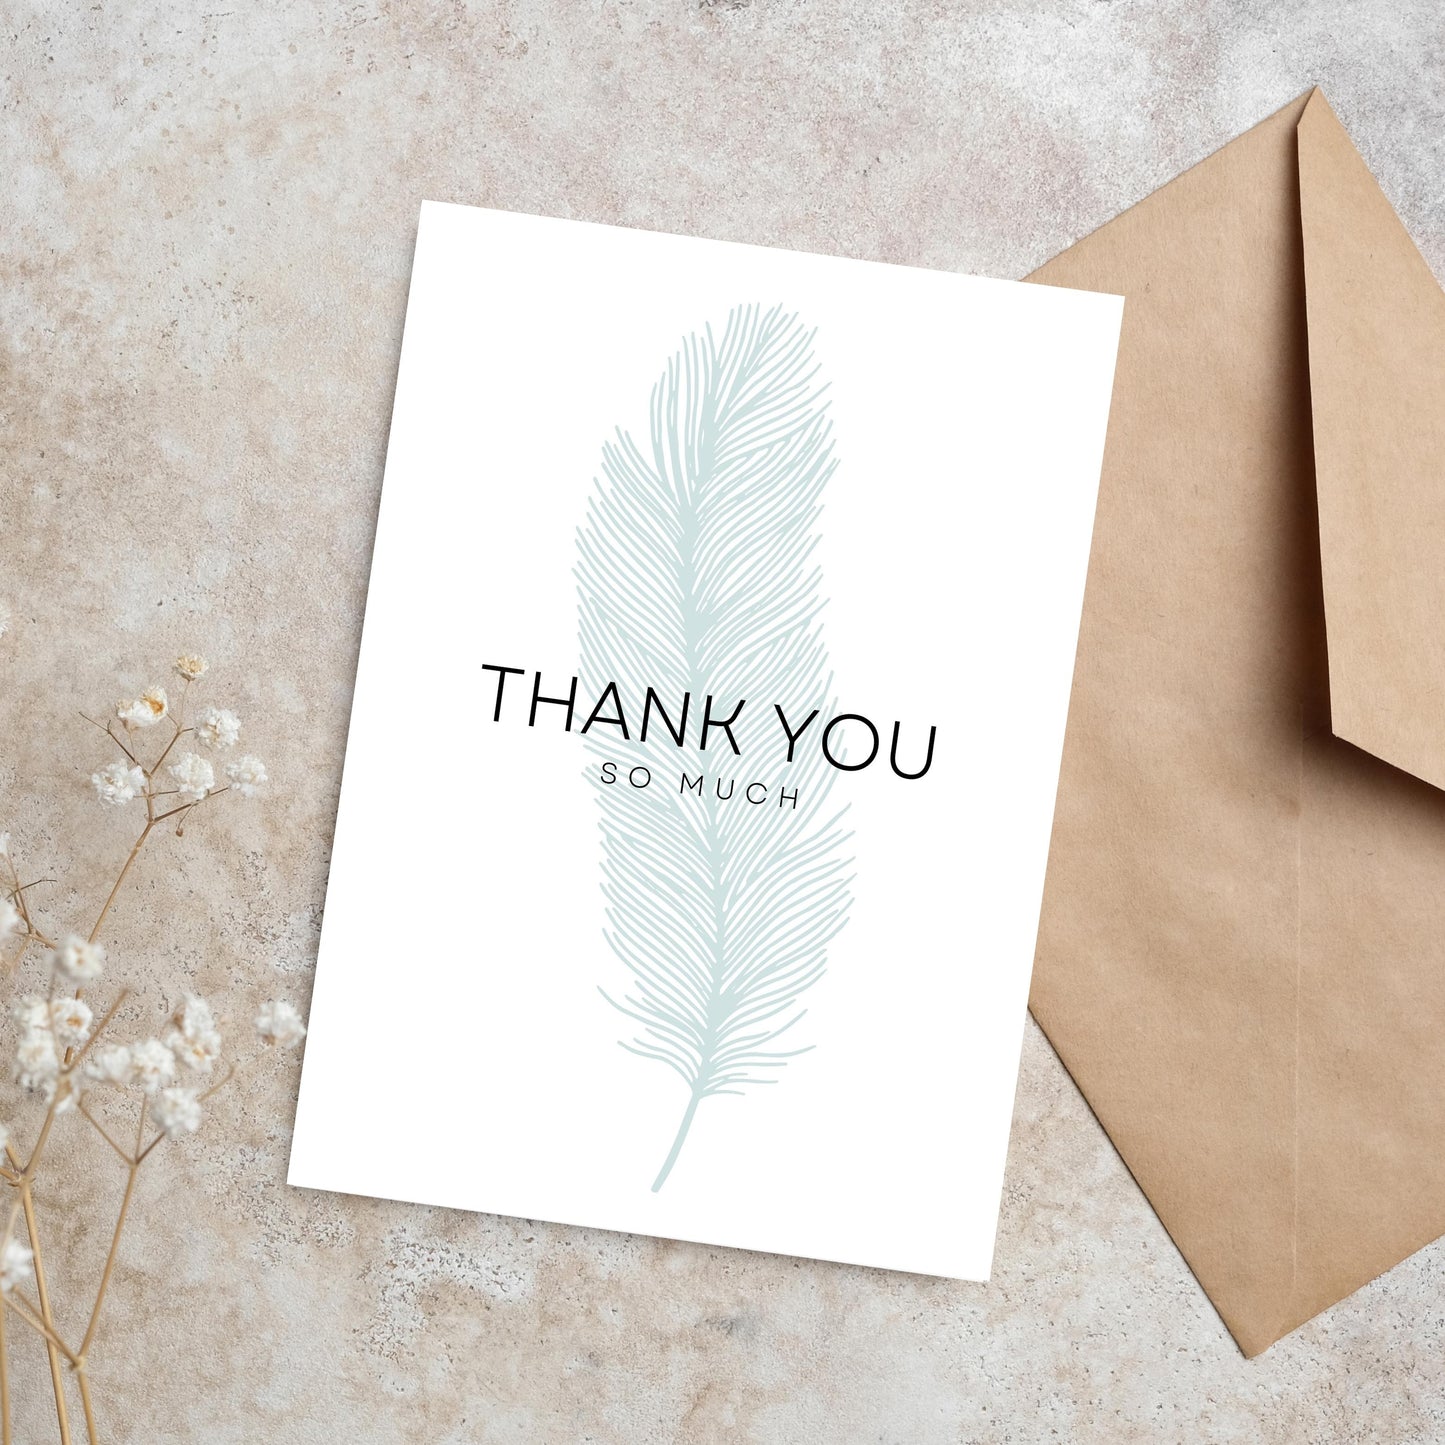 Thank You Printable Card Vol.3, card size 5"x7", print on 8.5"x11" paper size